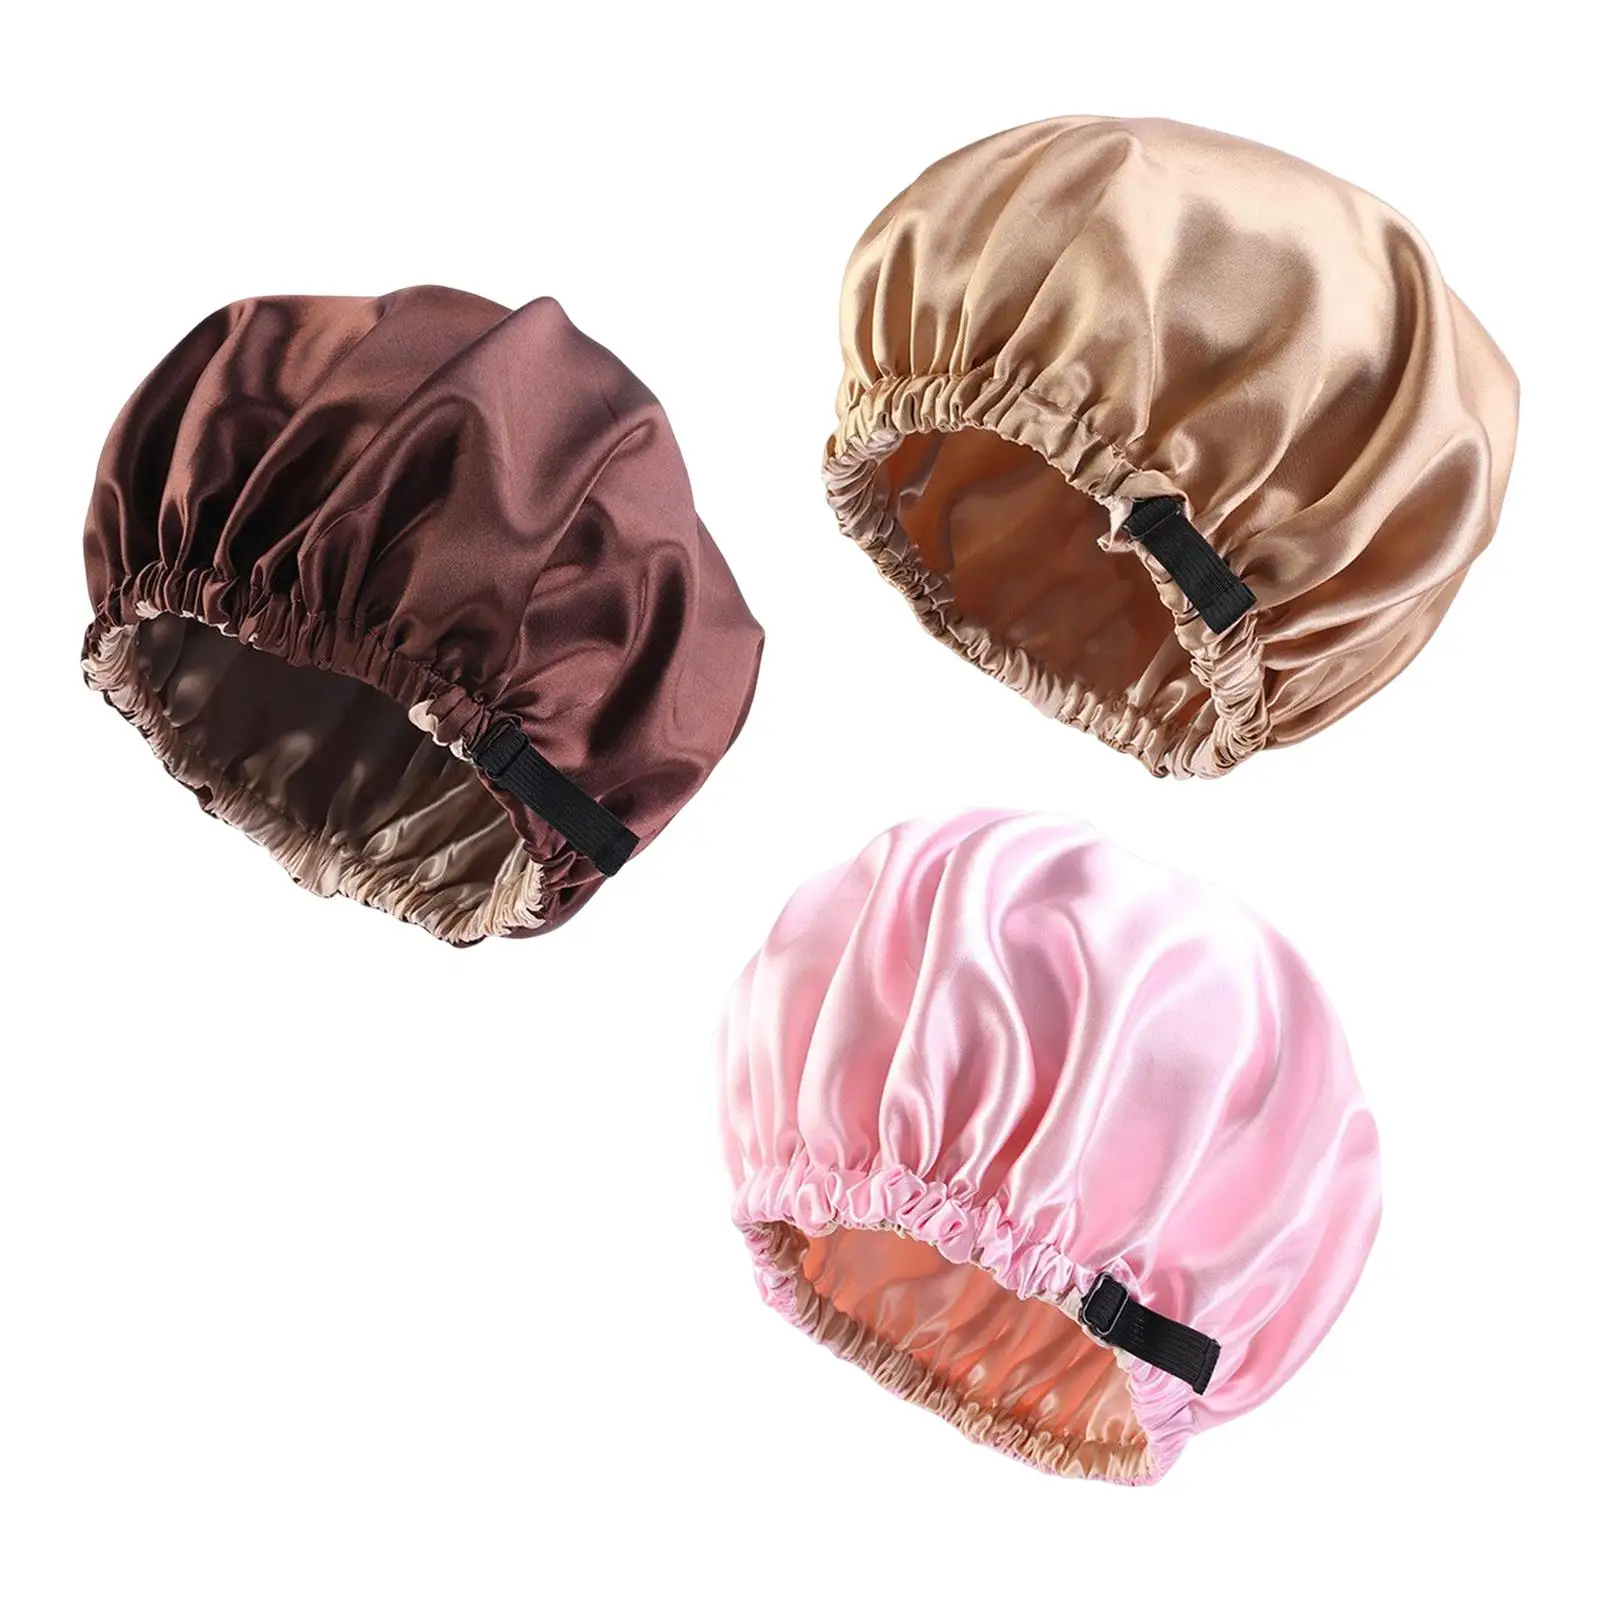 satin Caps Sleeping Caps Headwear Head cover Hat Elastic Band Soft Round Shower Hat for Women girls Curly Hair